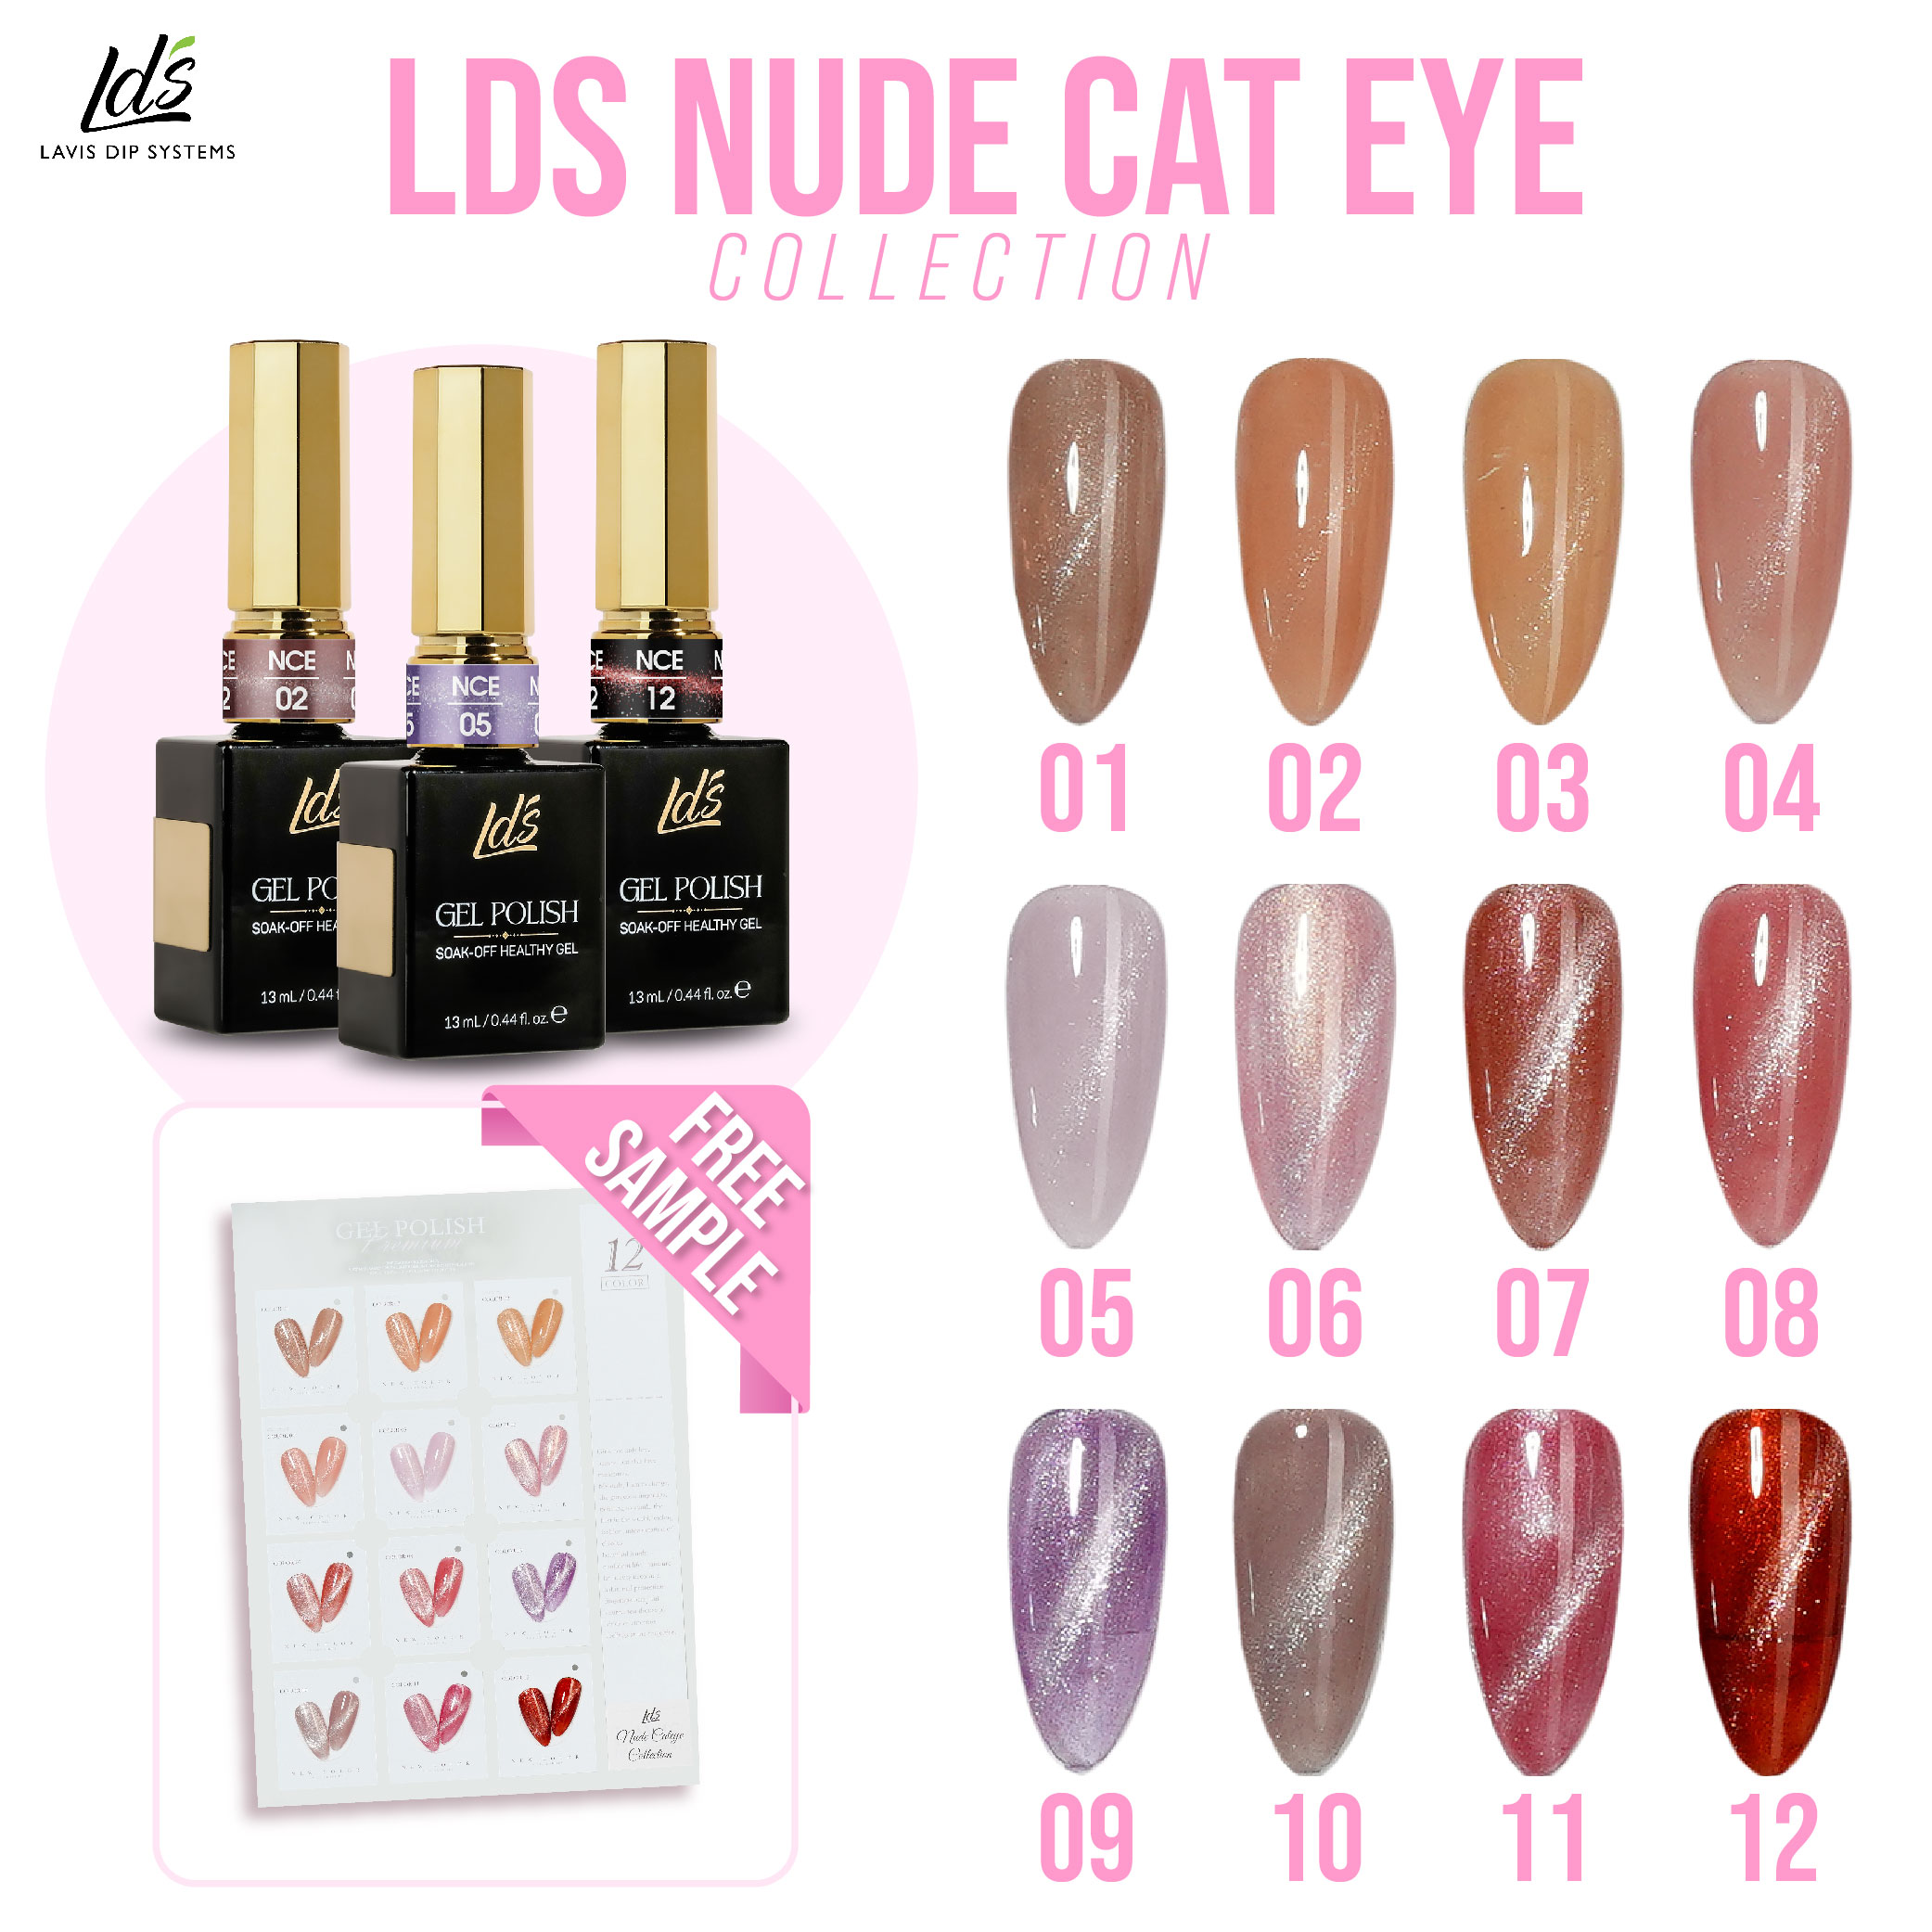 LDS NUDE CAT EYES COLLECTION